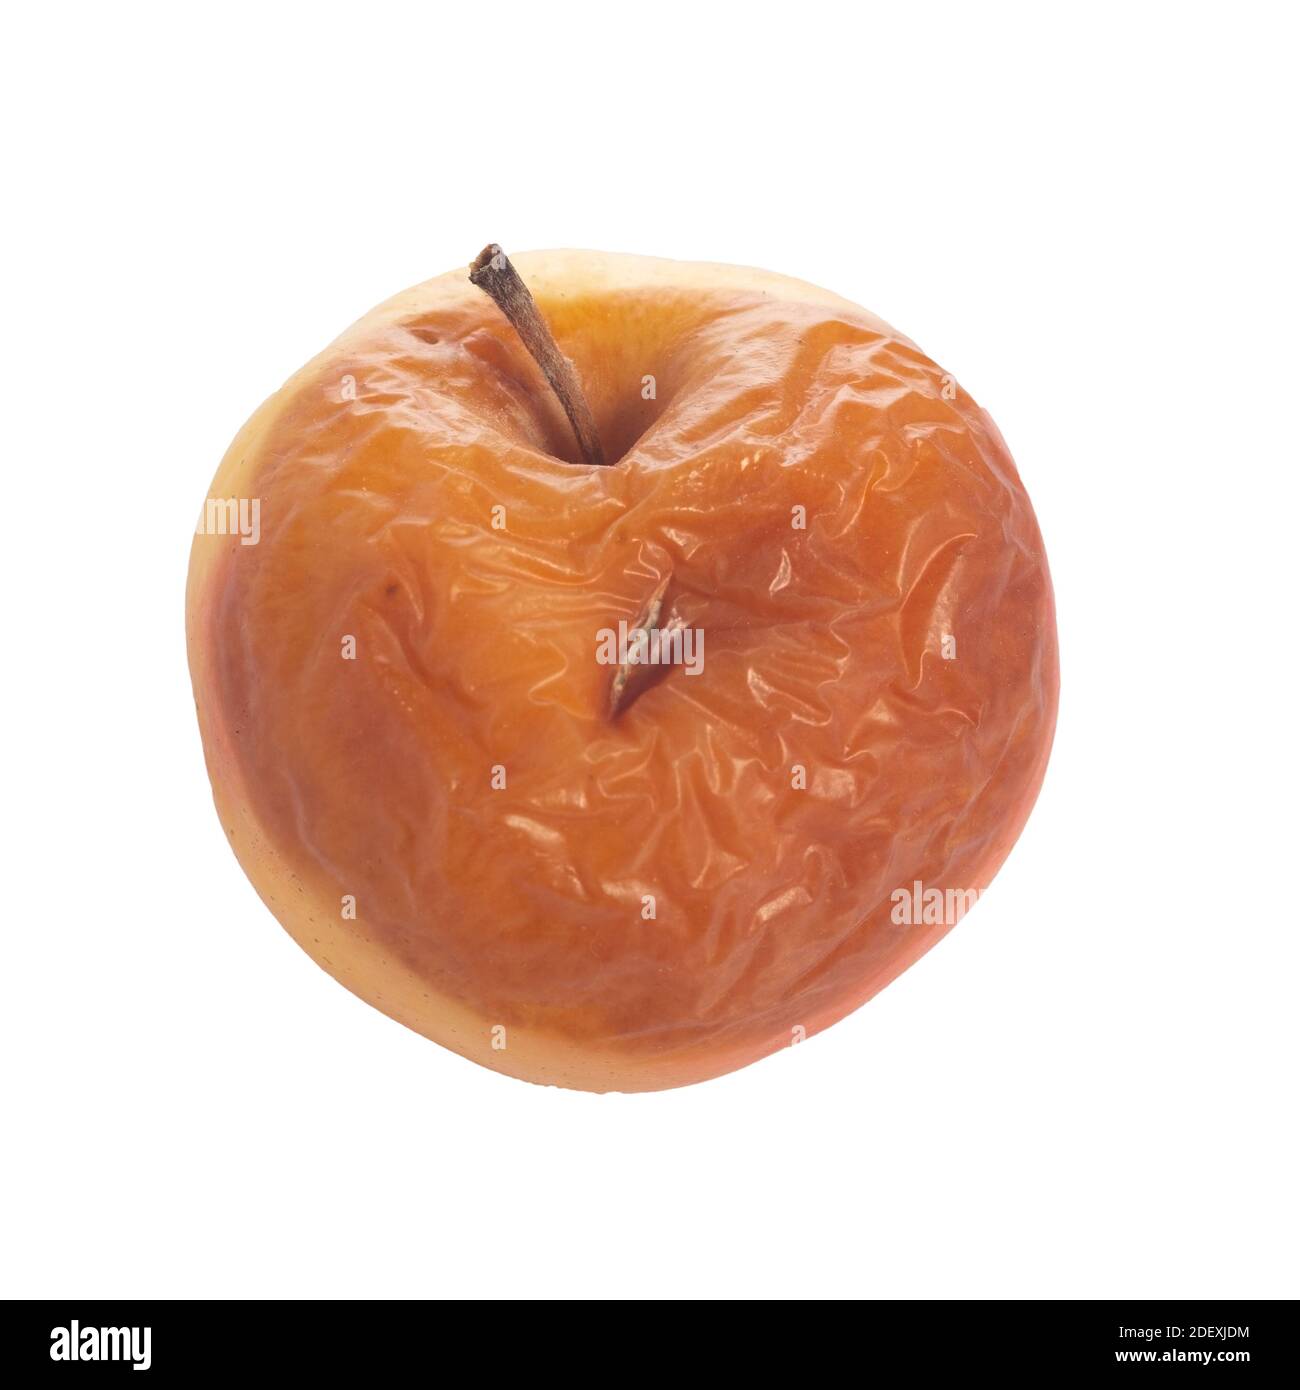 One bad spoiled apple, close-up, isolate on white background Stock Photo